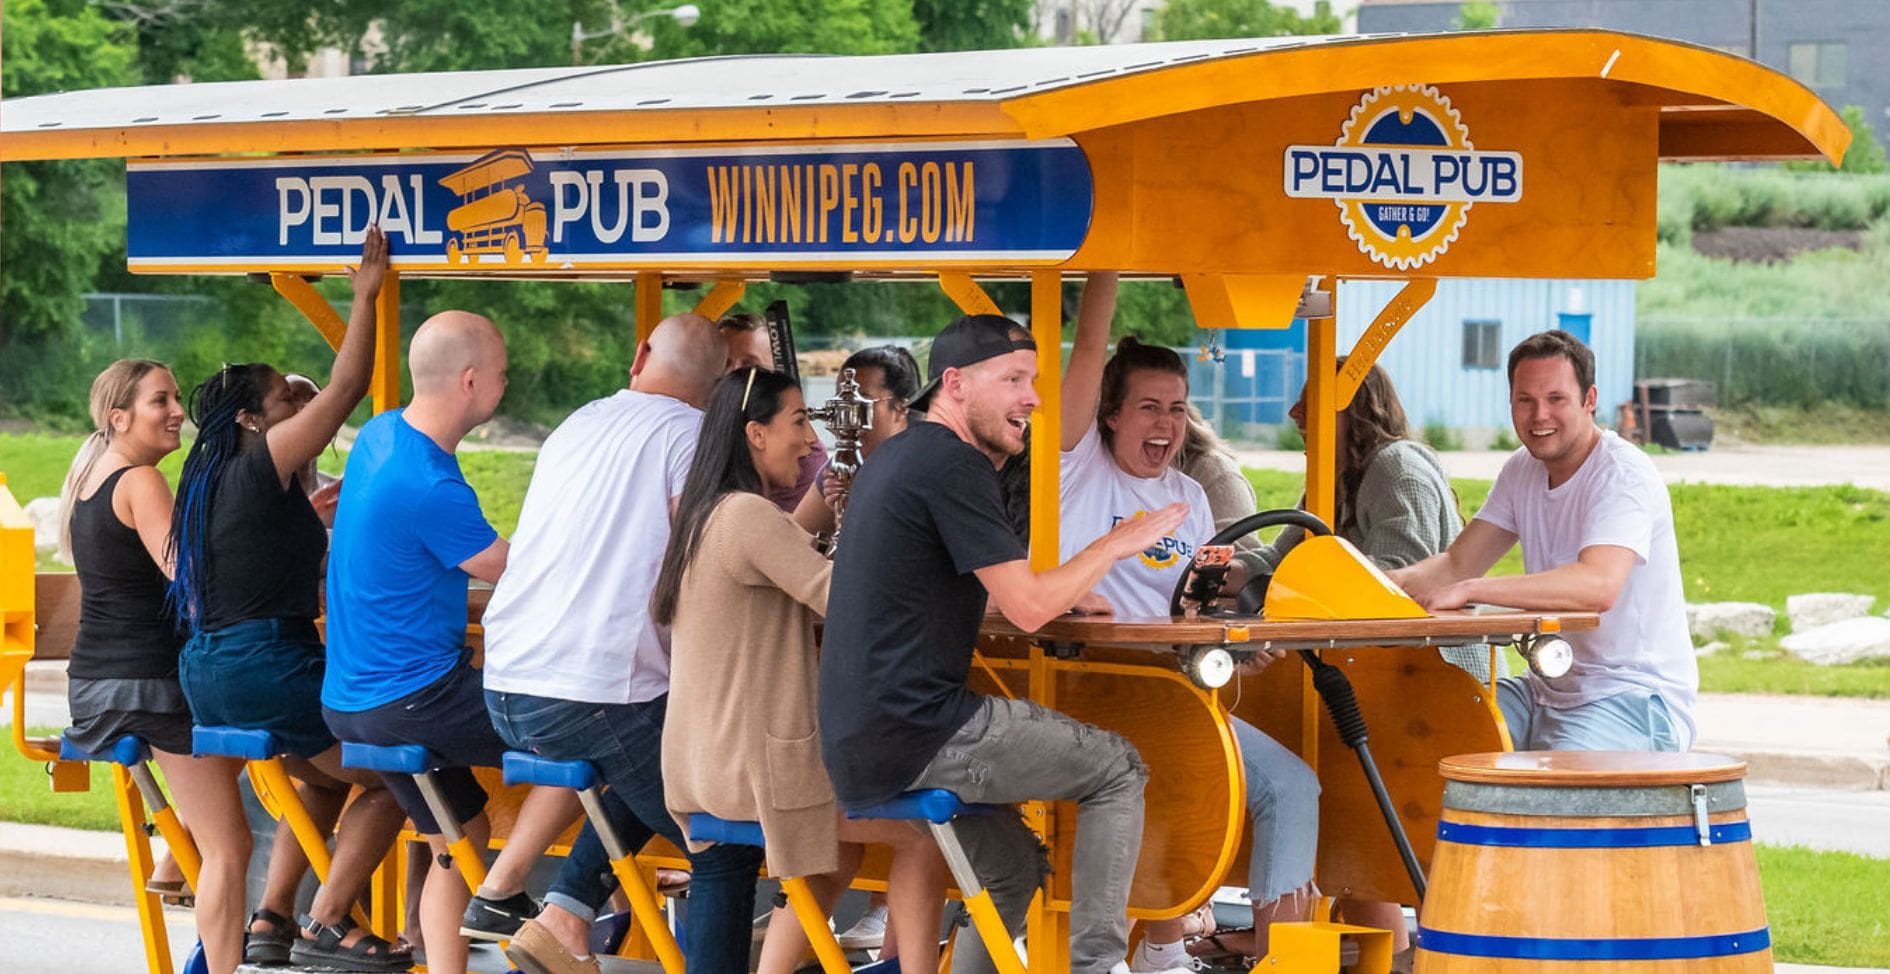 close-up of group of friends on pedal pub bike smiling